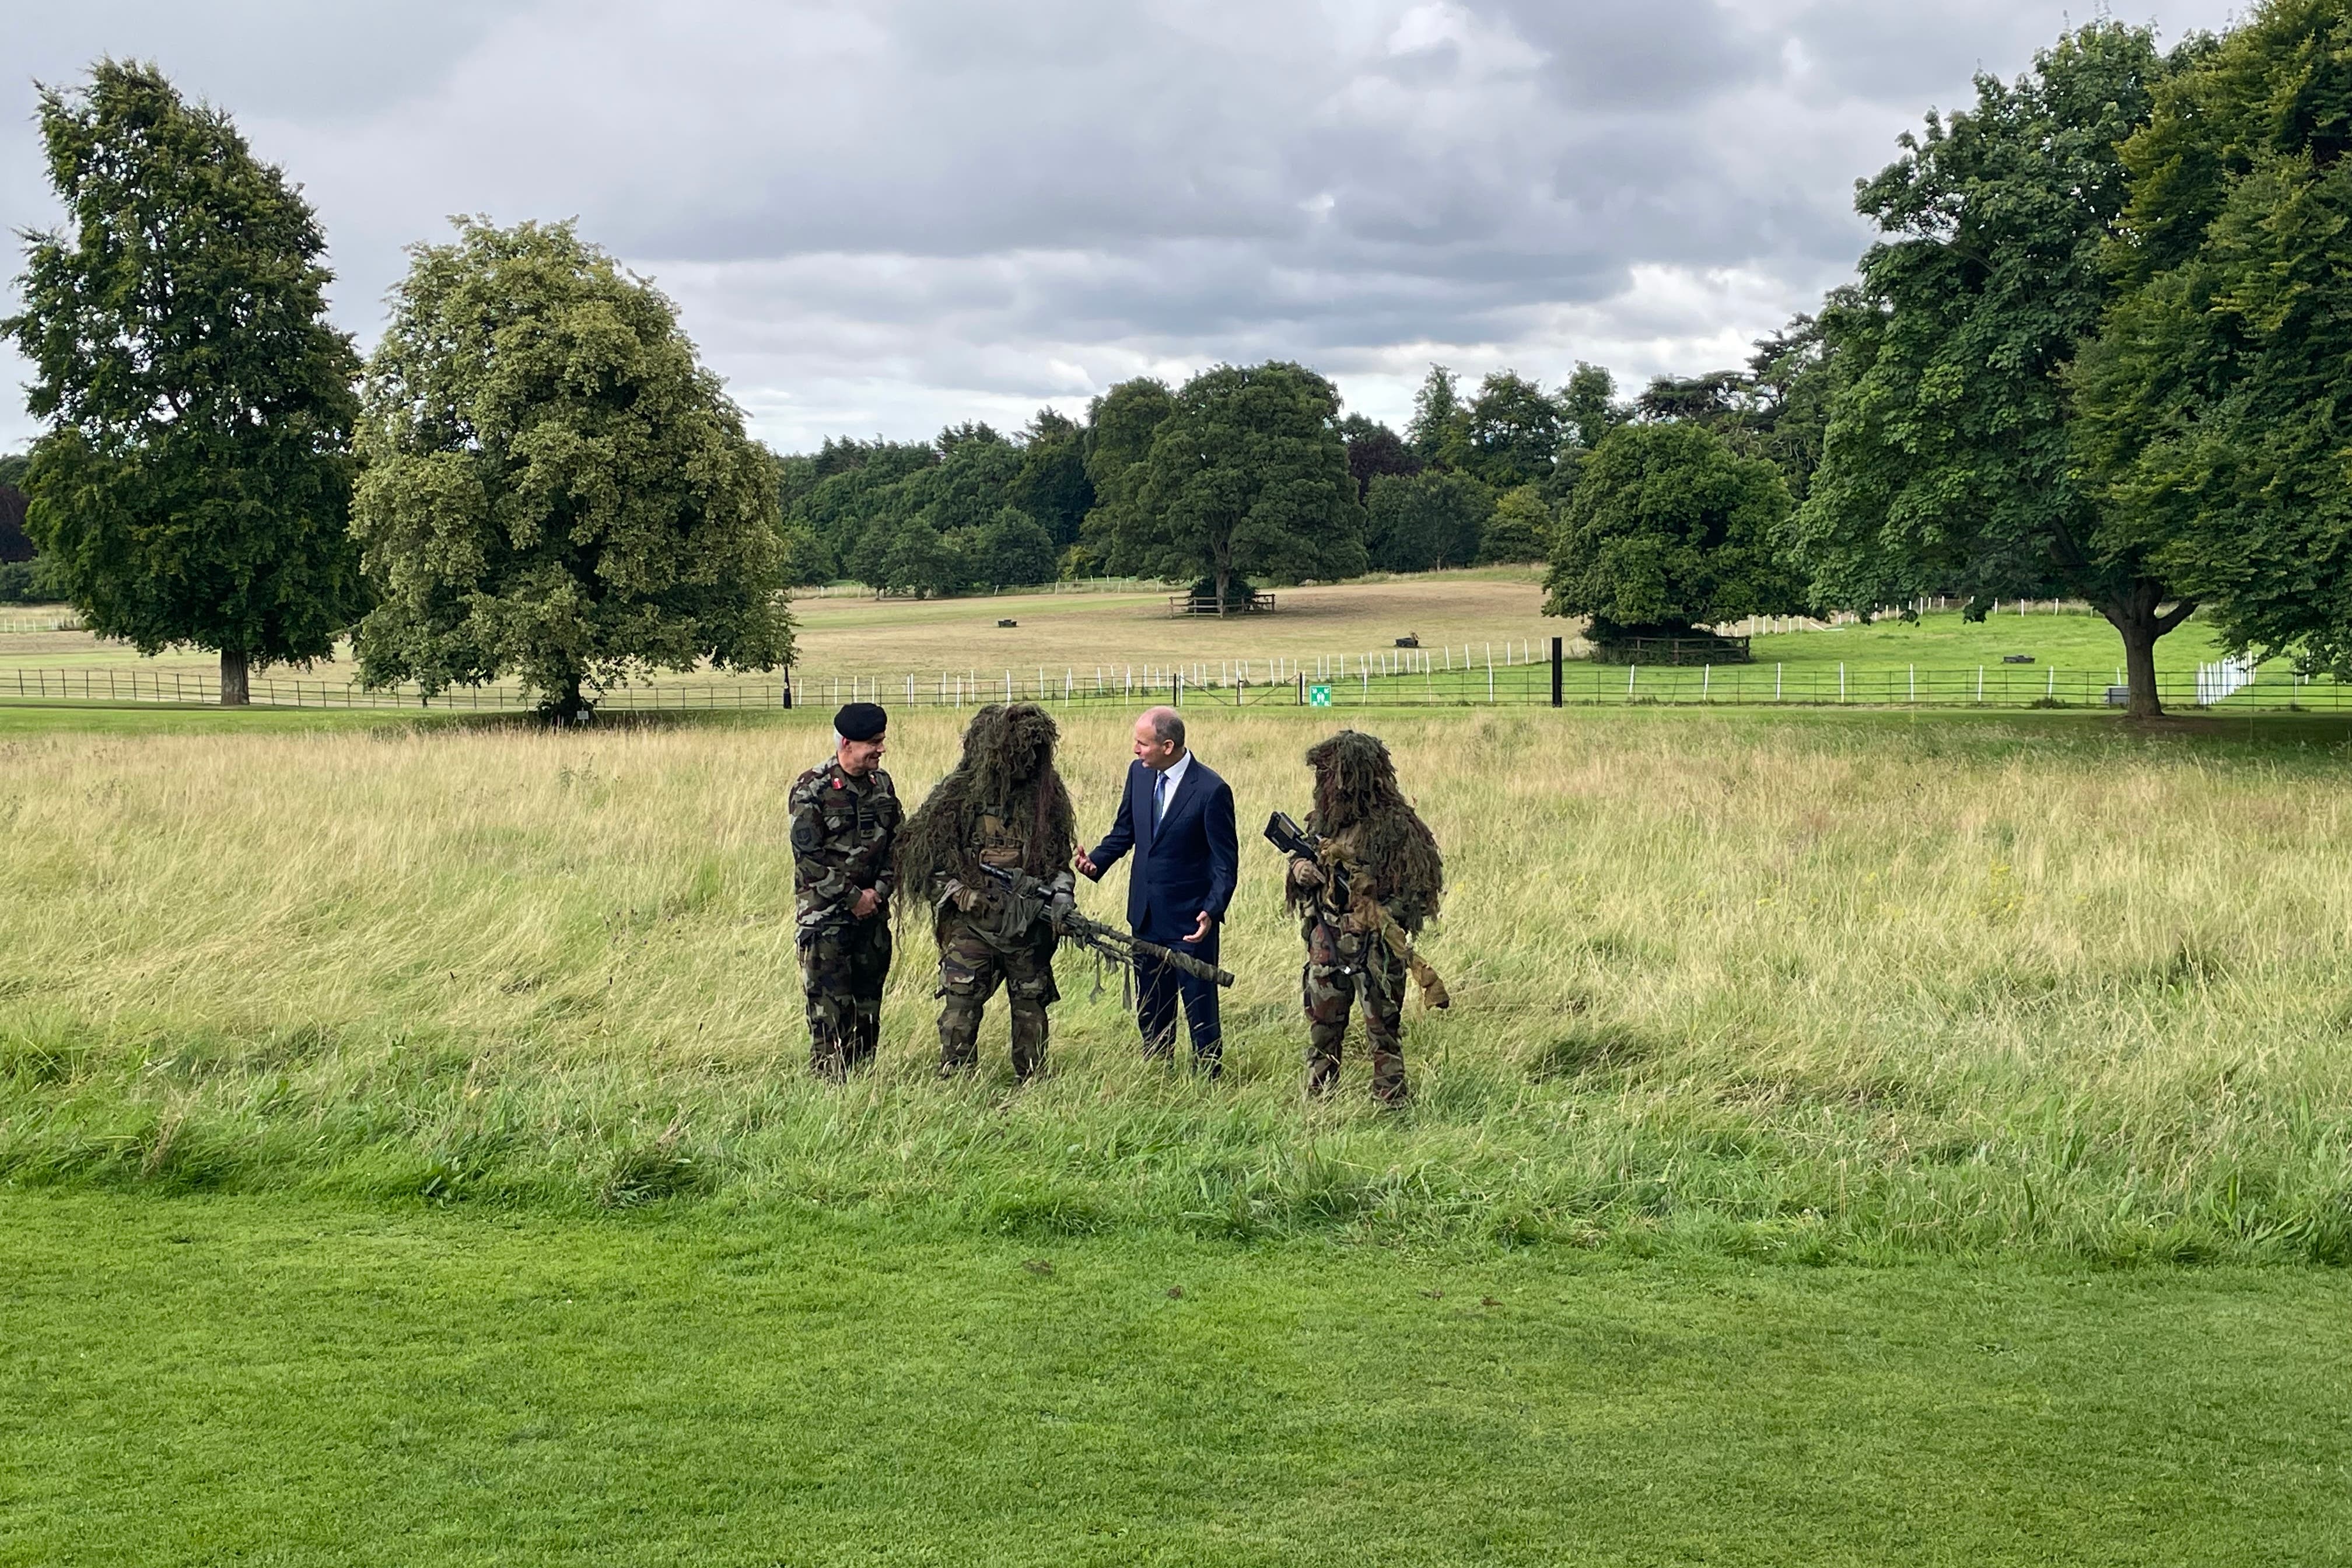 Tanaiste and Minister for Defence Micheal Martin and Defence Forces Chief of Staff Lt Gen Sean Clancy attended an open day to encourage people to join the Irish army (PA)